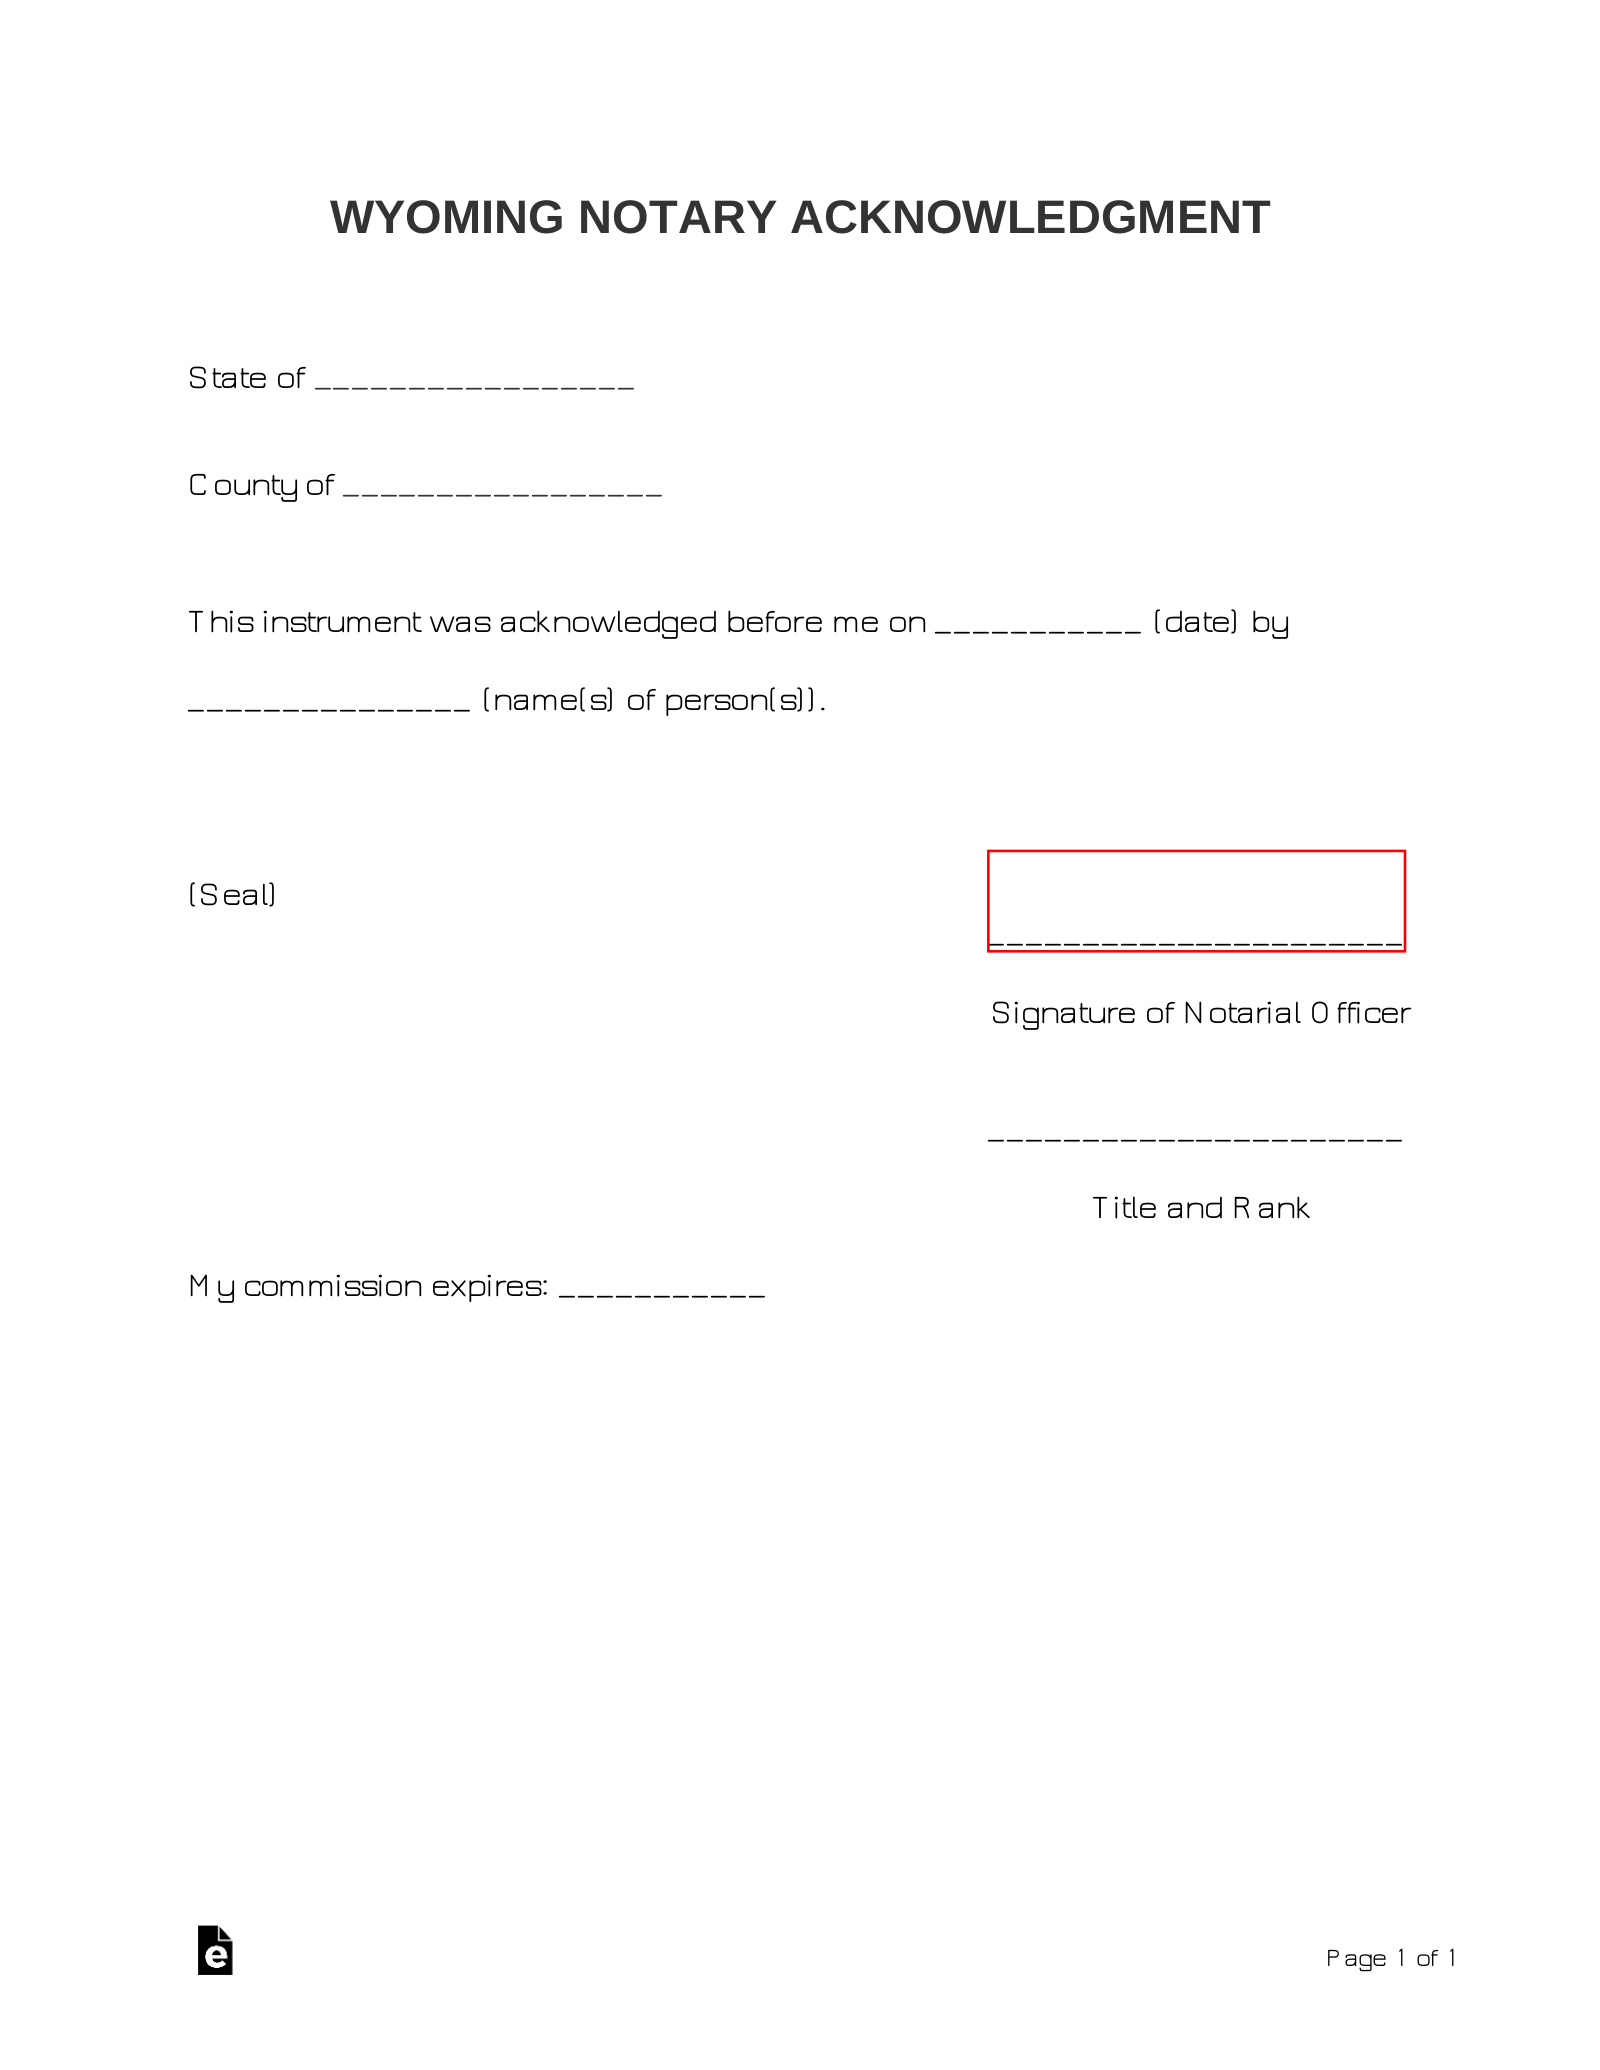 Wyoming Notary Acknowledgment Form